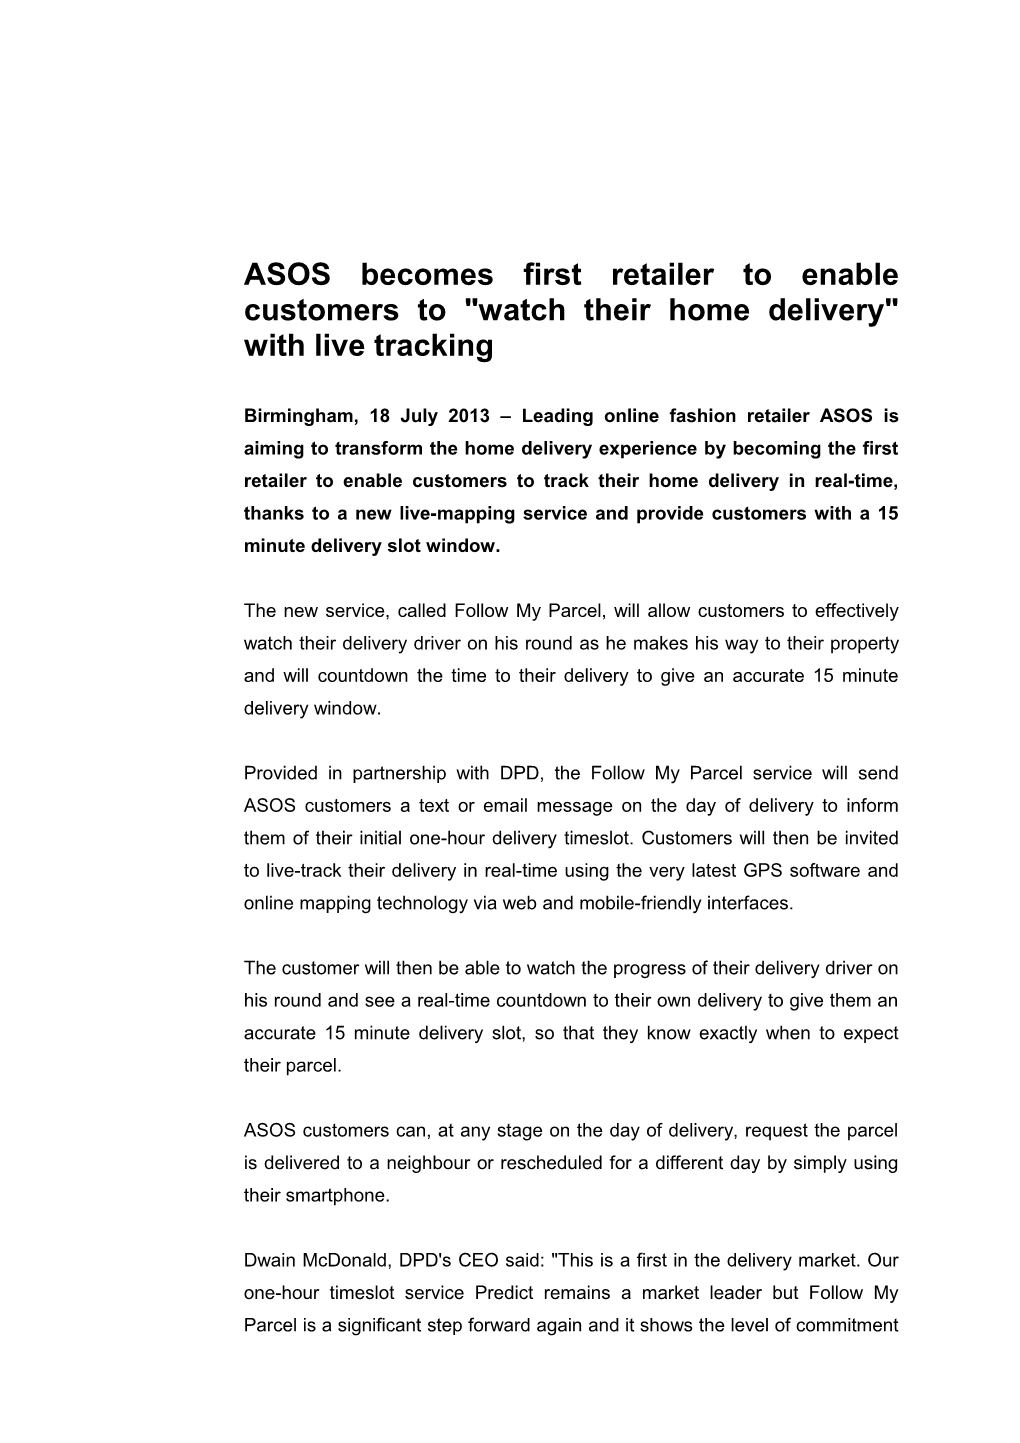 ASOS Becomes First Retailer to Enable Customers to Watch Their Home Delivery with Live